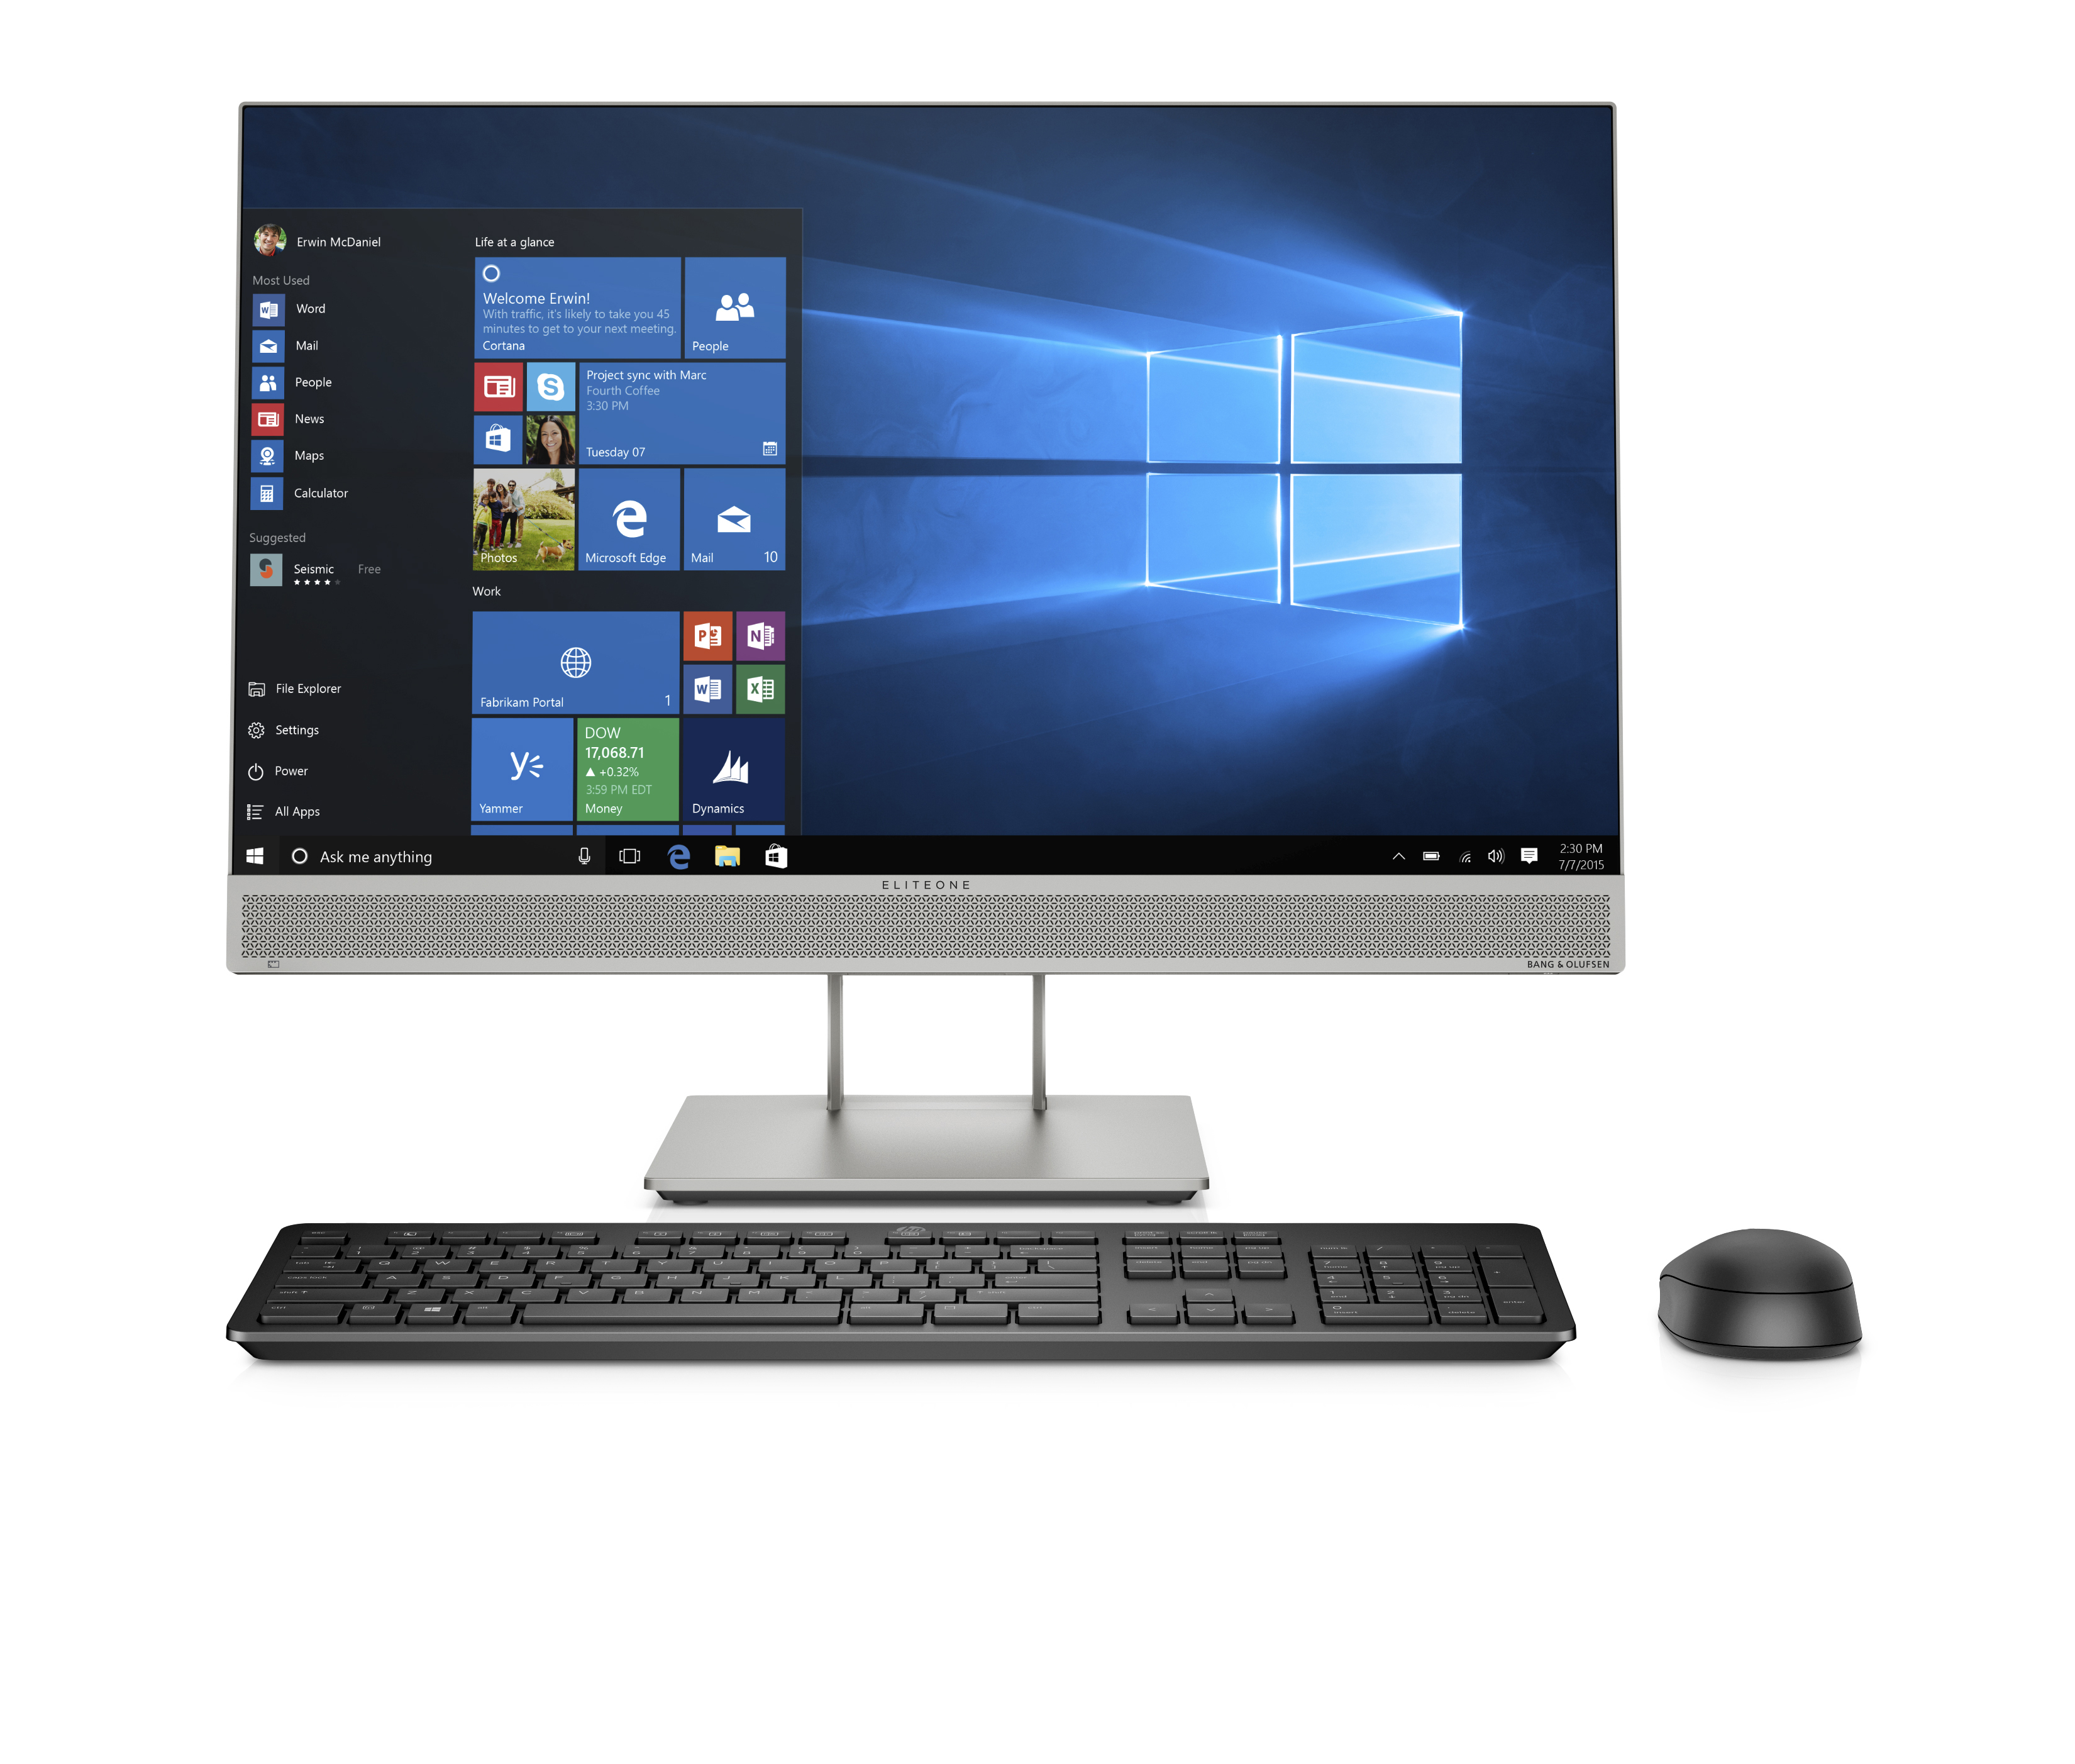 hp launches new monitors and all in one ces 2019 eliteone 800 g5 aio front